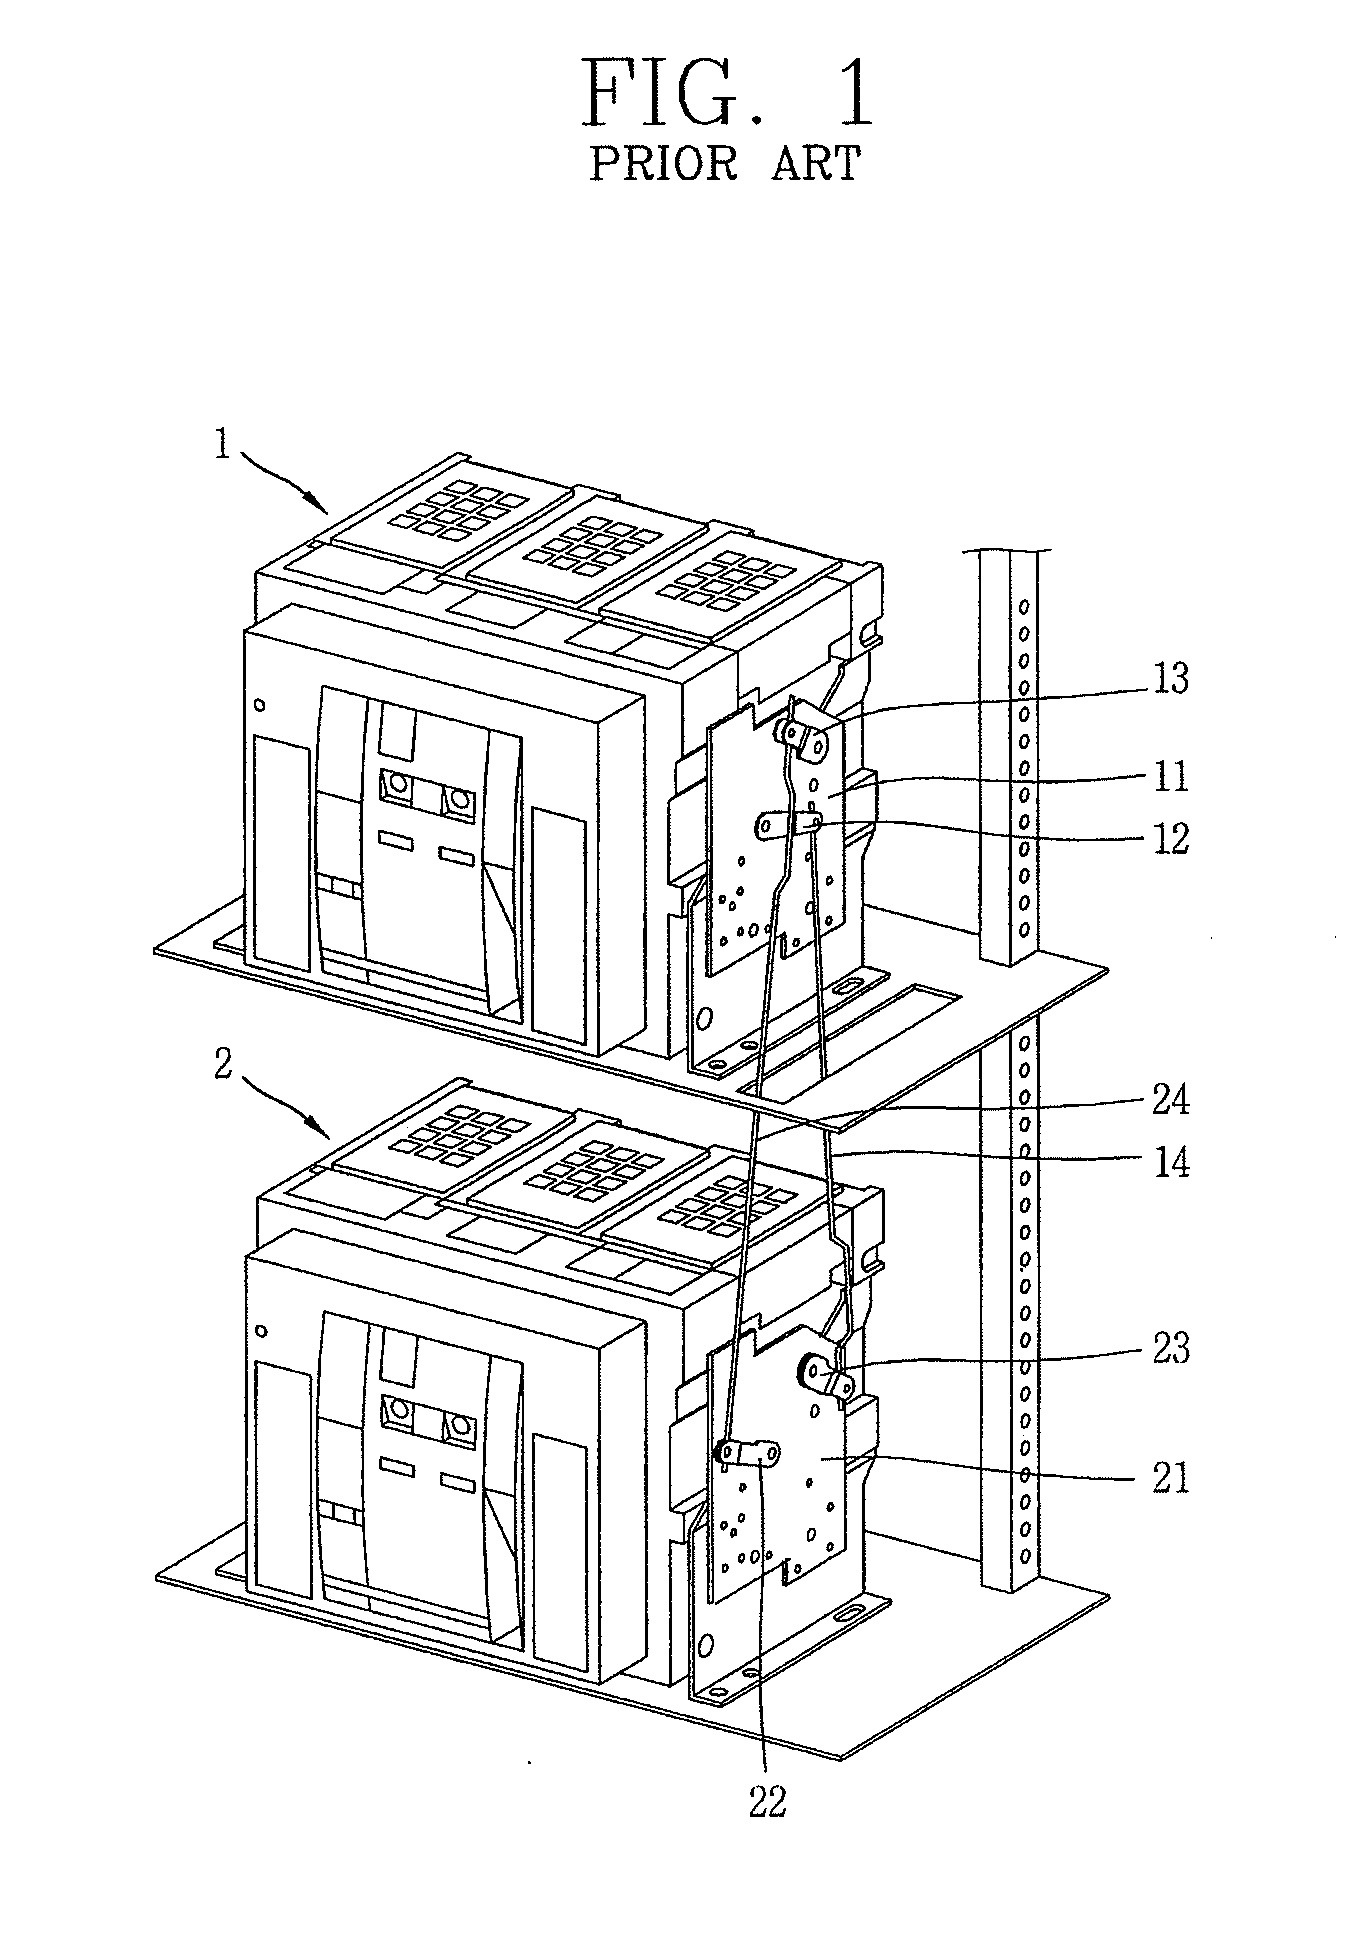 Transfer device for automatic transfer switch